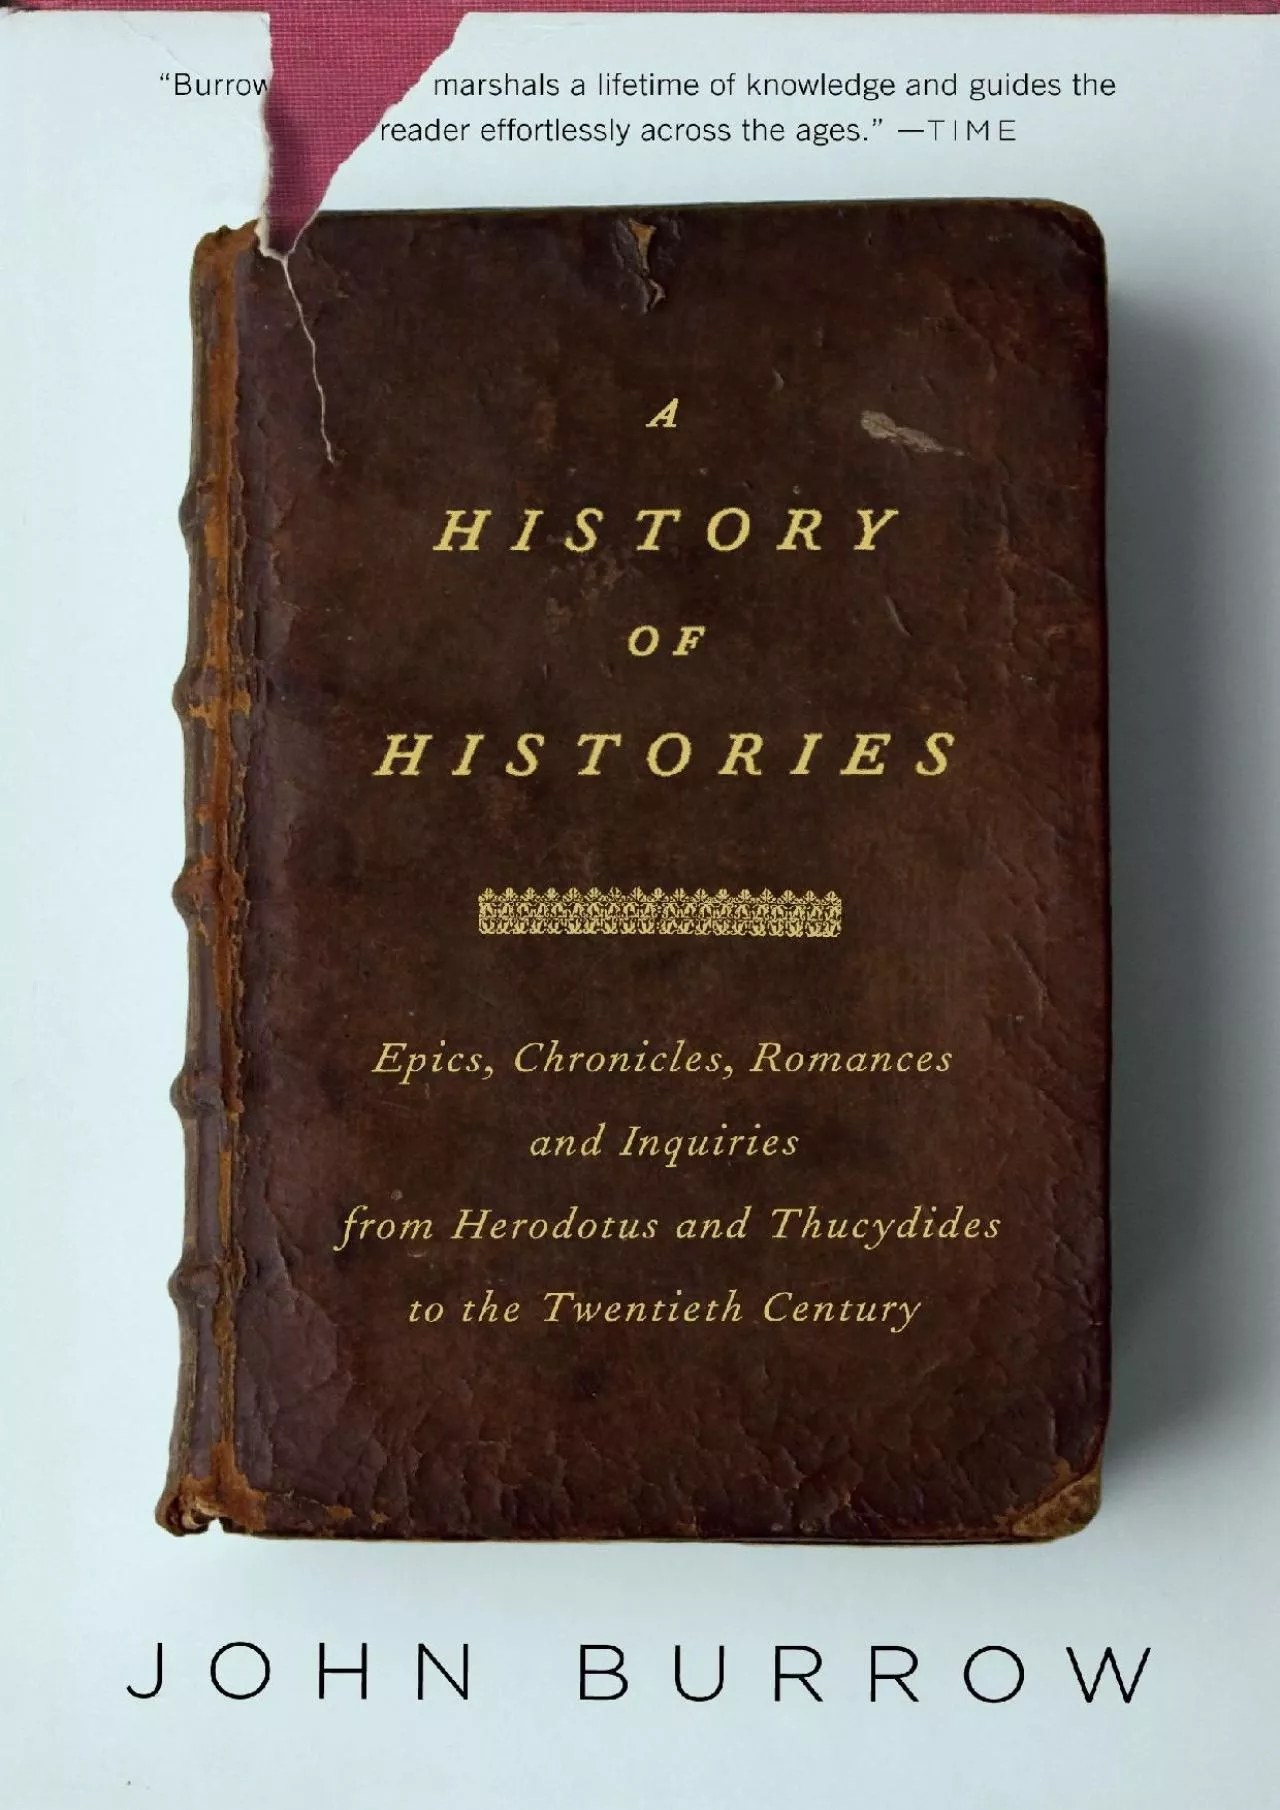 (BOOK)-A History of Histories: Epics, Chronicles, and Inquiries from Herodotus and Thucydides